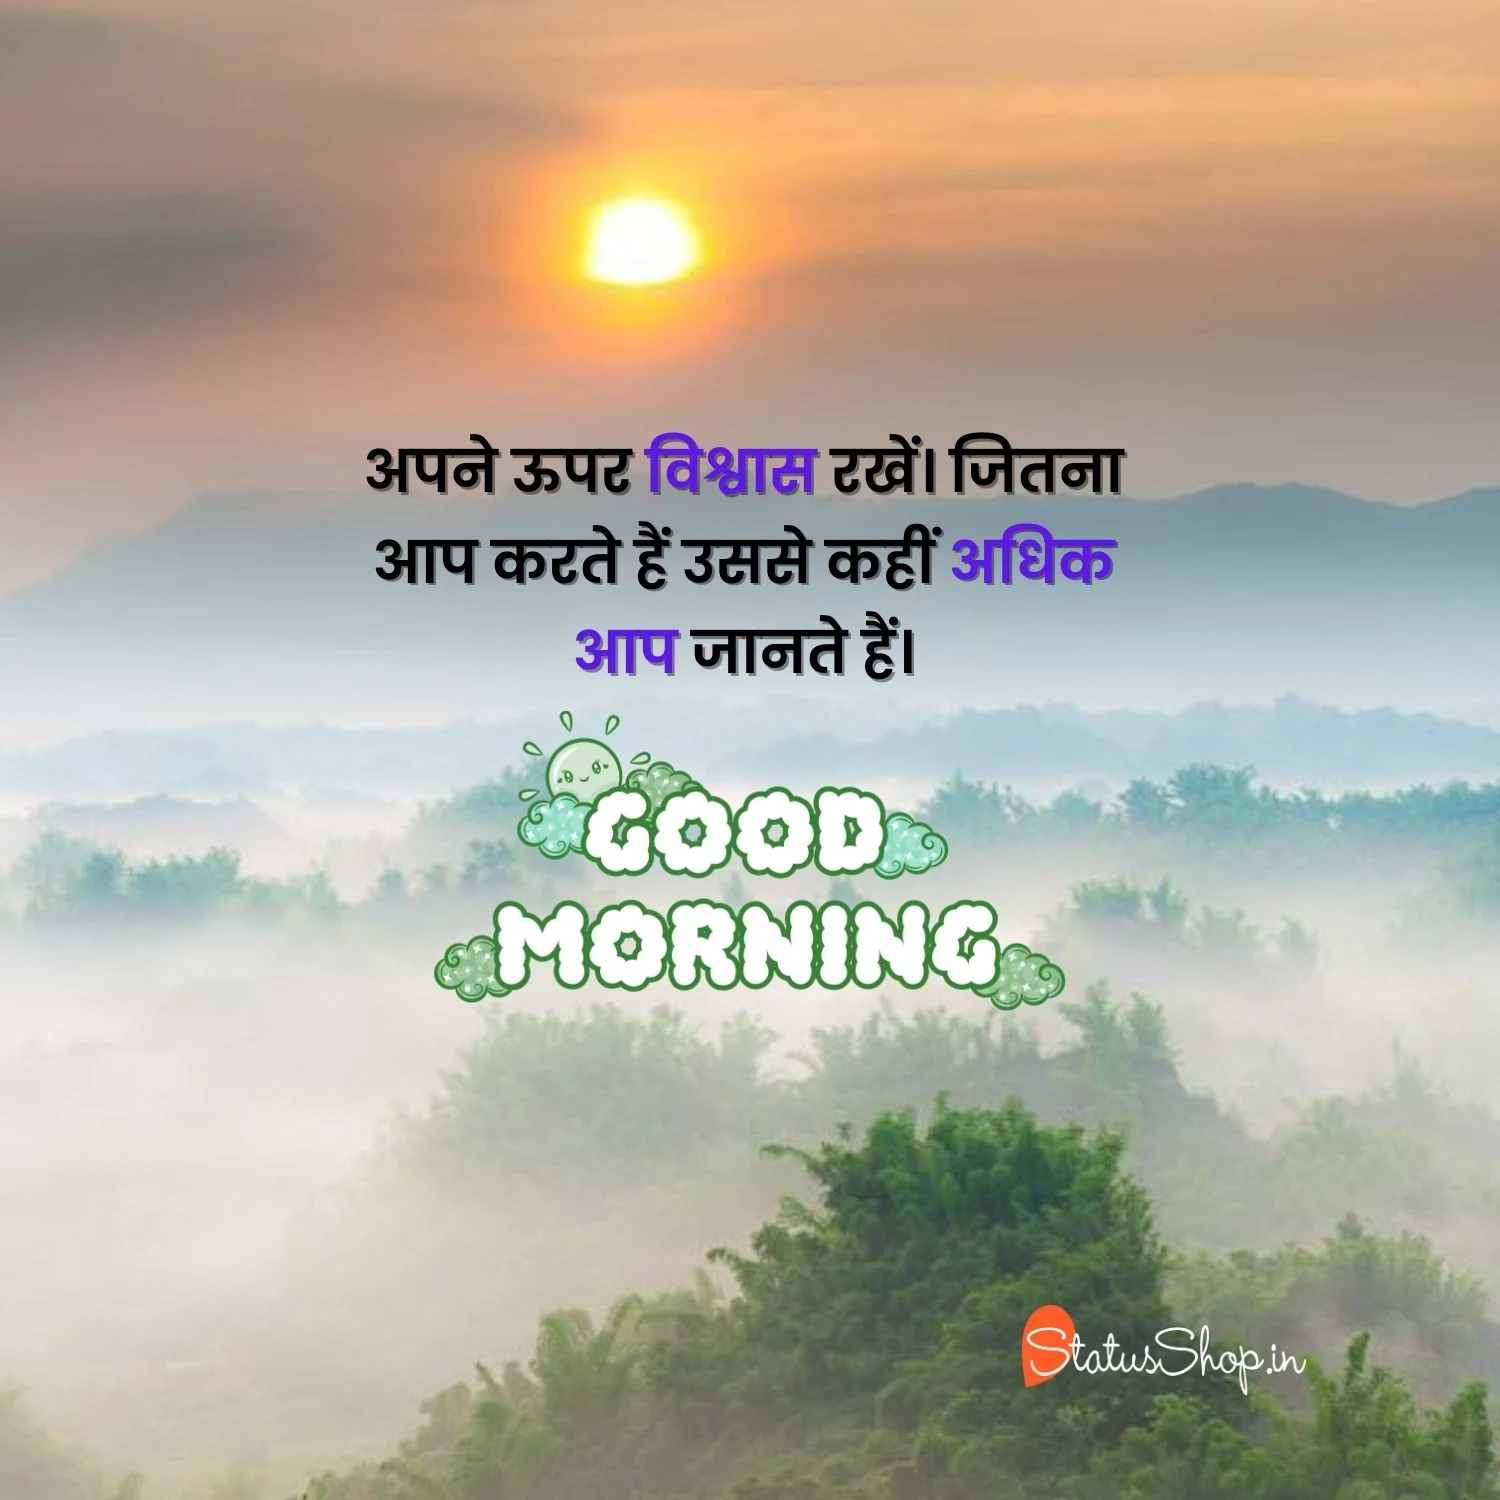 Hindi-Good-Morning-Images-With-Positive-Words